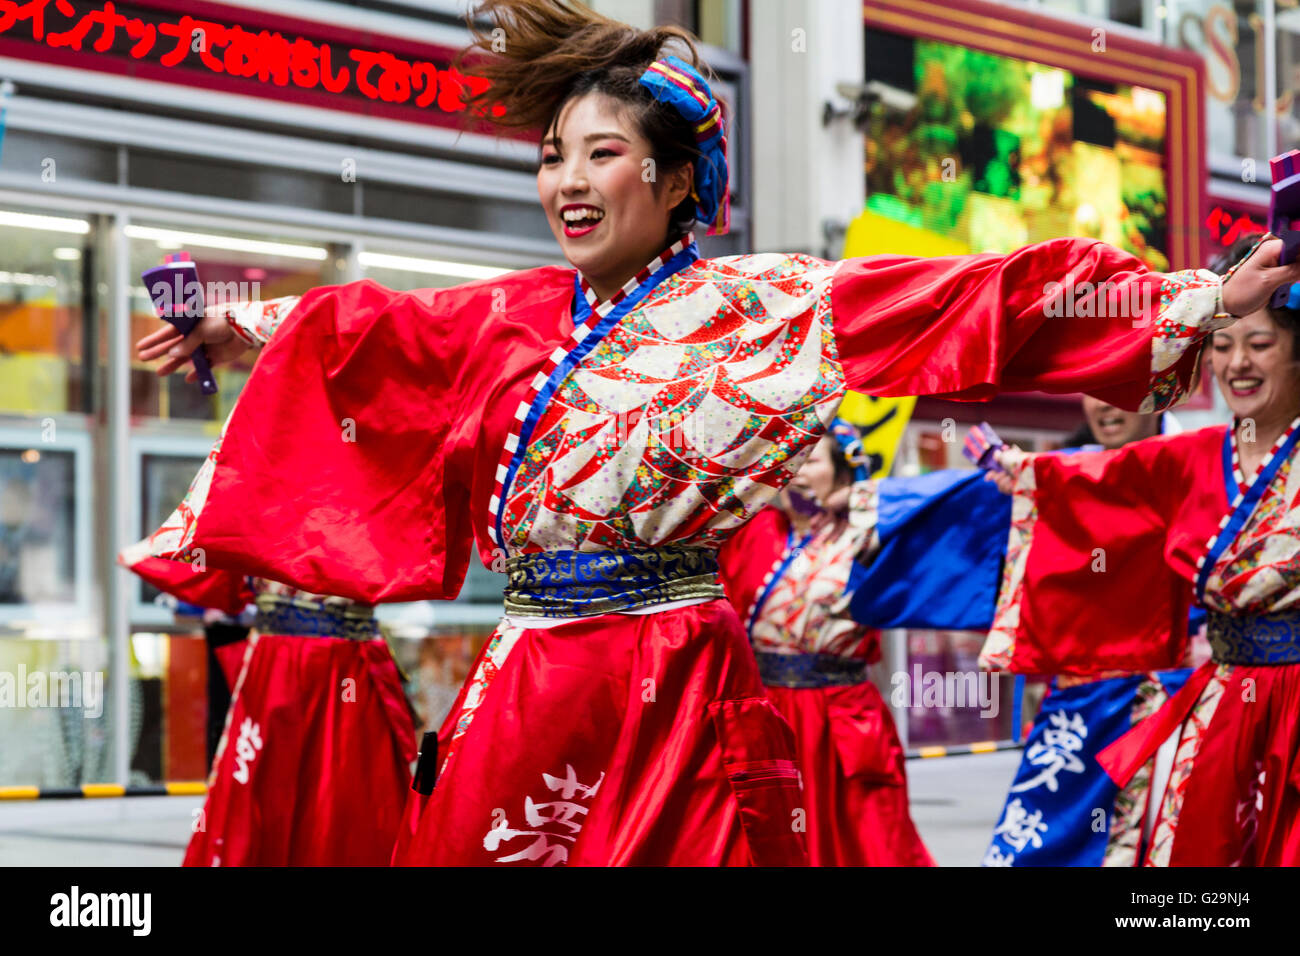 Japan, Kumamoto. Hinokuni Yosakoi dance festival. Close up of Japanese young woman dancer, part of a team, arms outstretched, dancing in mall. Stock Photo